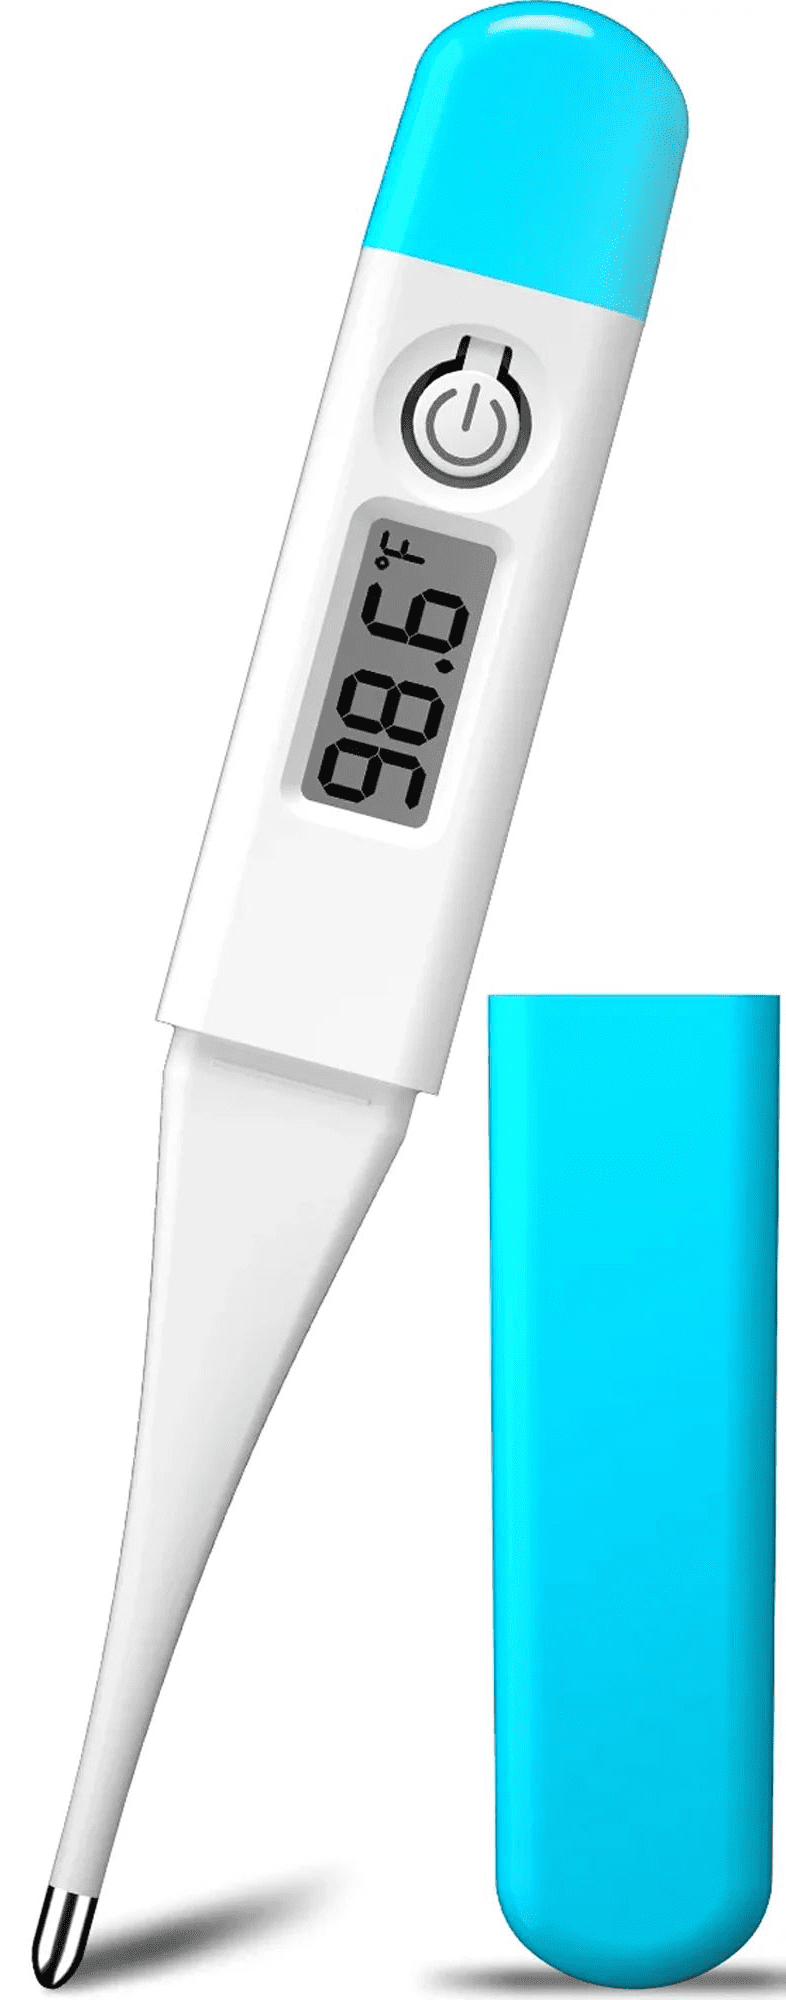 Safety 1st Thermometers